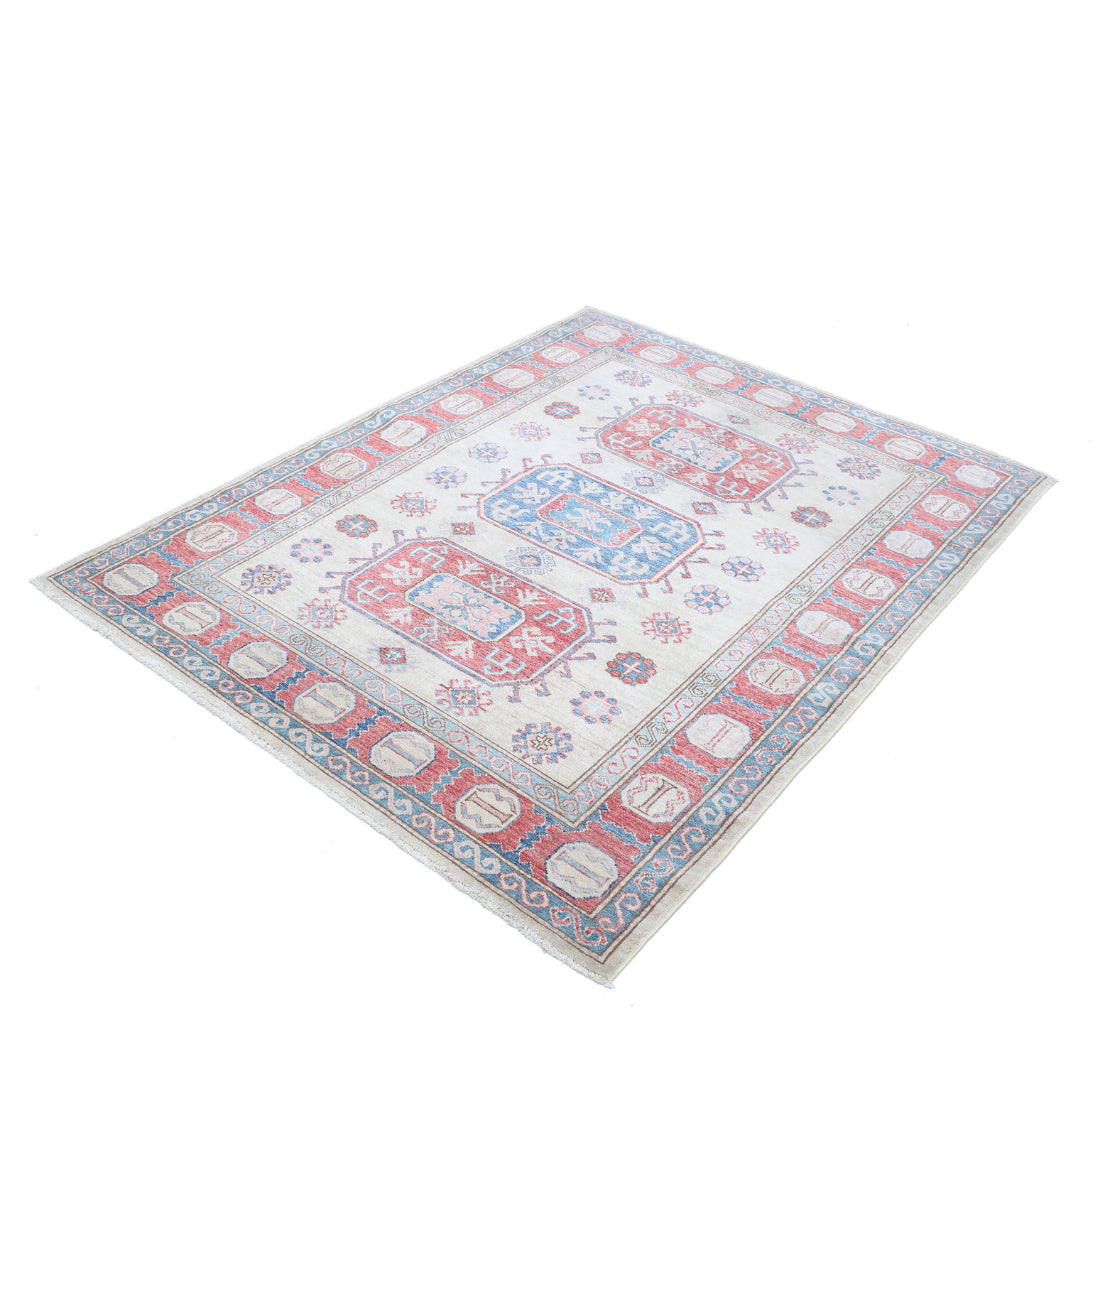 Hand Knotted Royal Kazak Wool Rug - 4'8'' x 5'11'' 4'8'' x 5'11'' (140 X 178) / Ivory / Red